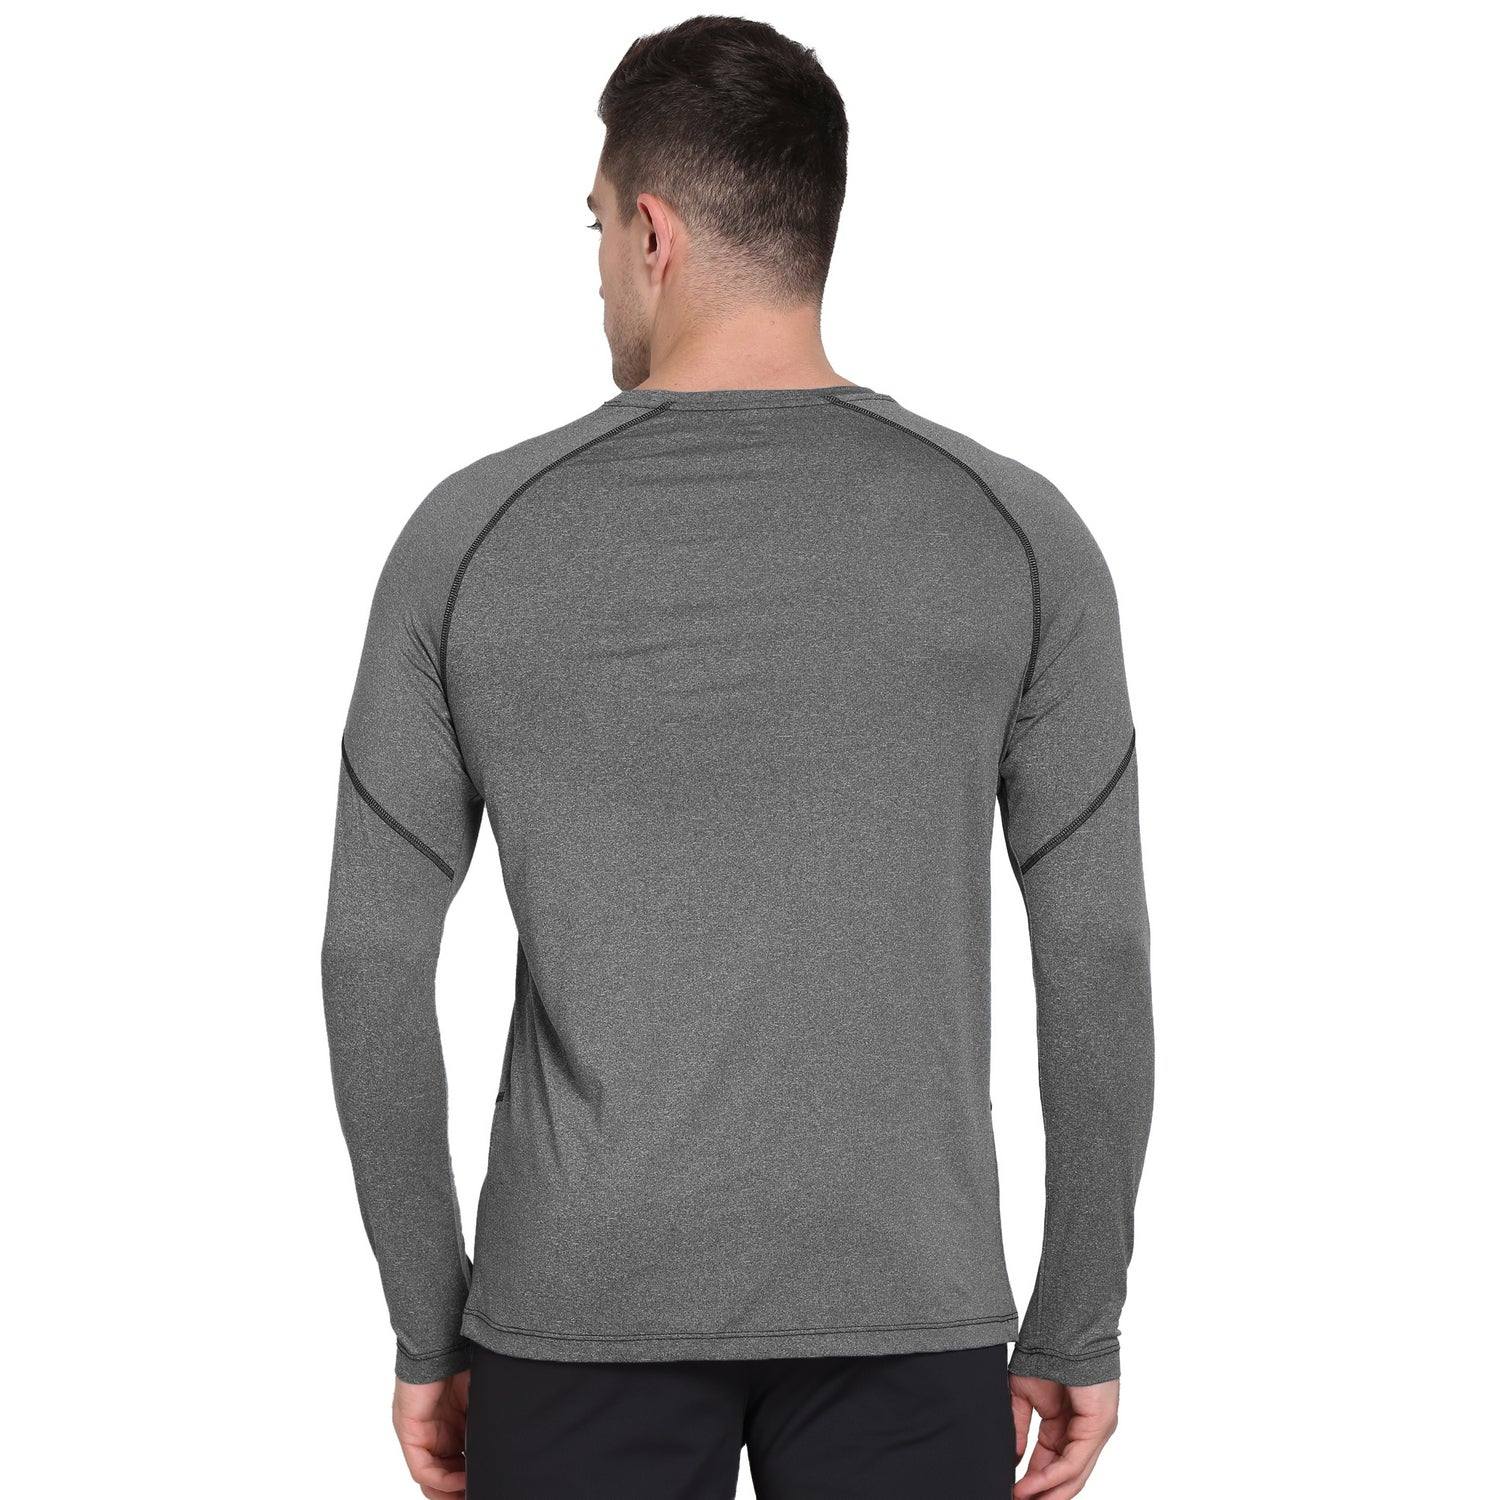 Full sleeves Gym T-shirt for Men | Sweat absorbing | Ultra cool stretch stylish Men's Tshirt